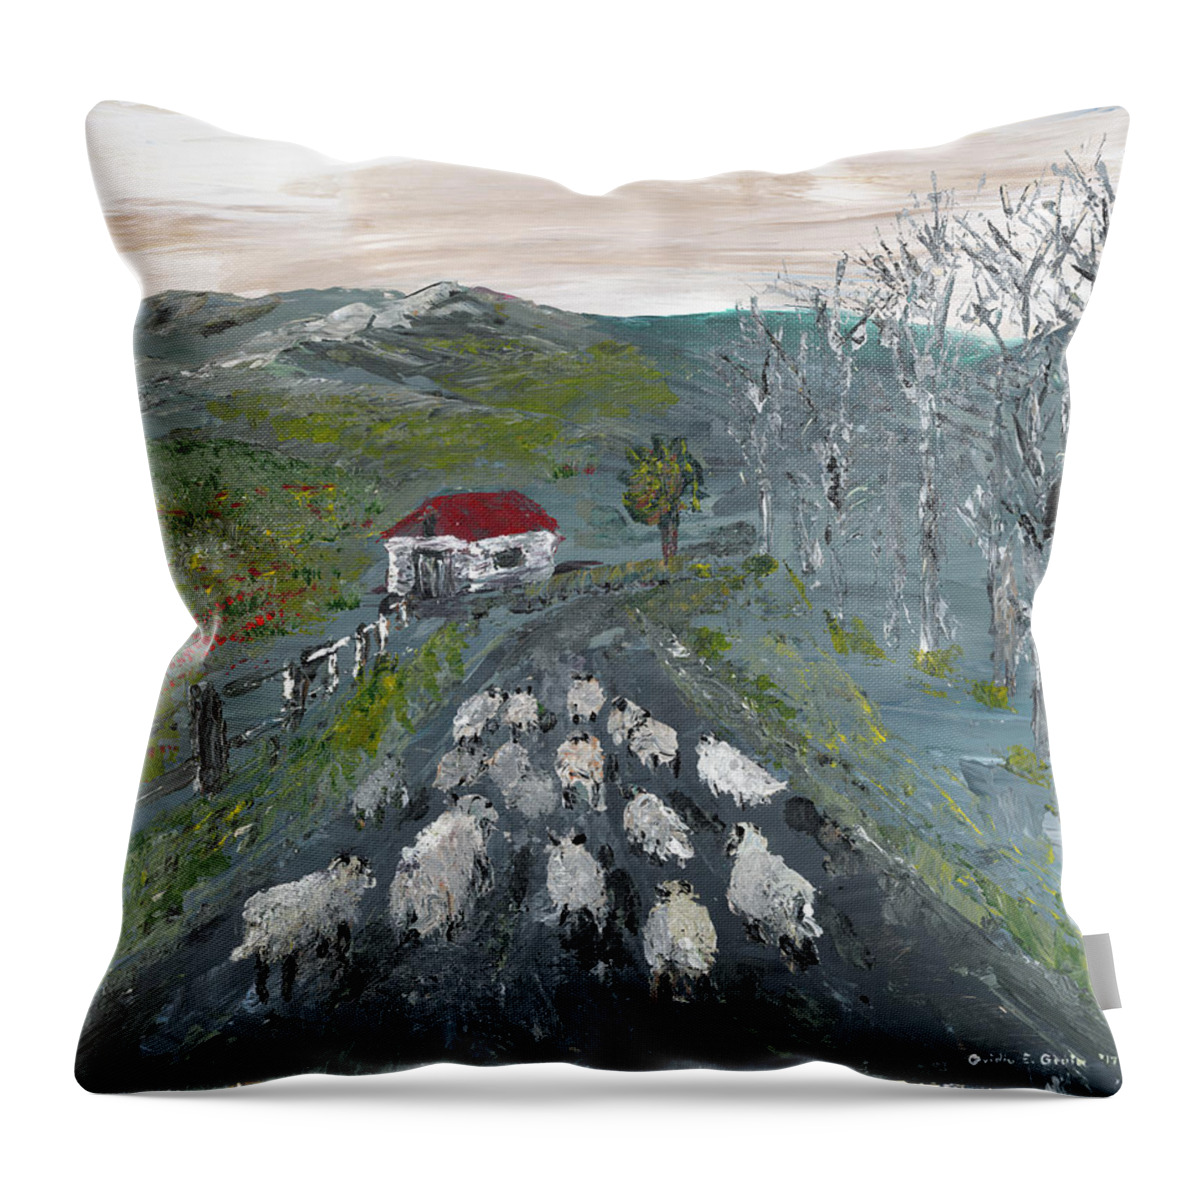 Landscape Throw Pillow featuring the painting Going Home by Ovidiu Ervin Gruia